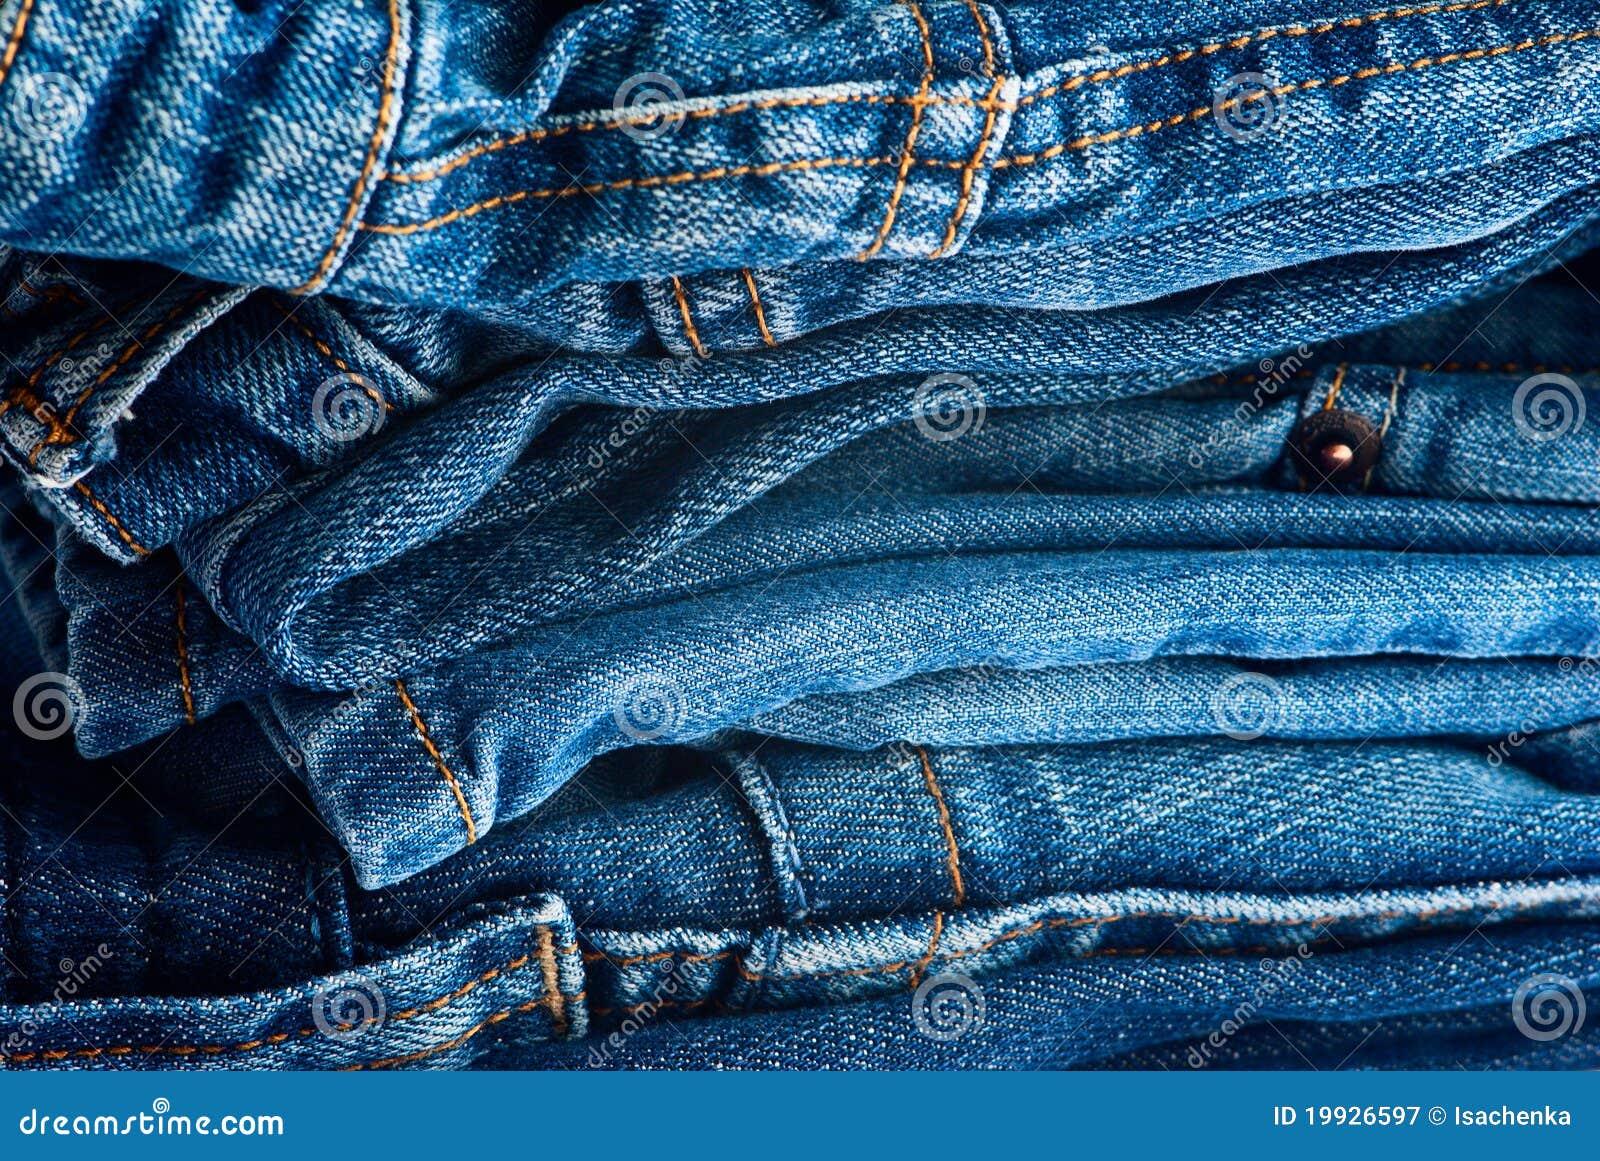 Pile Of Blue Jeans Royalty Free Stock Photography - Image: 19926597